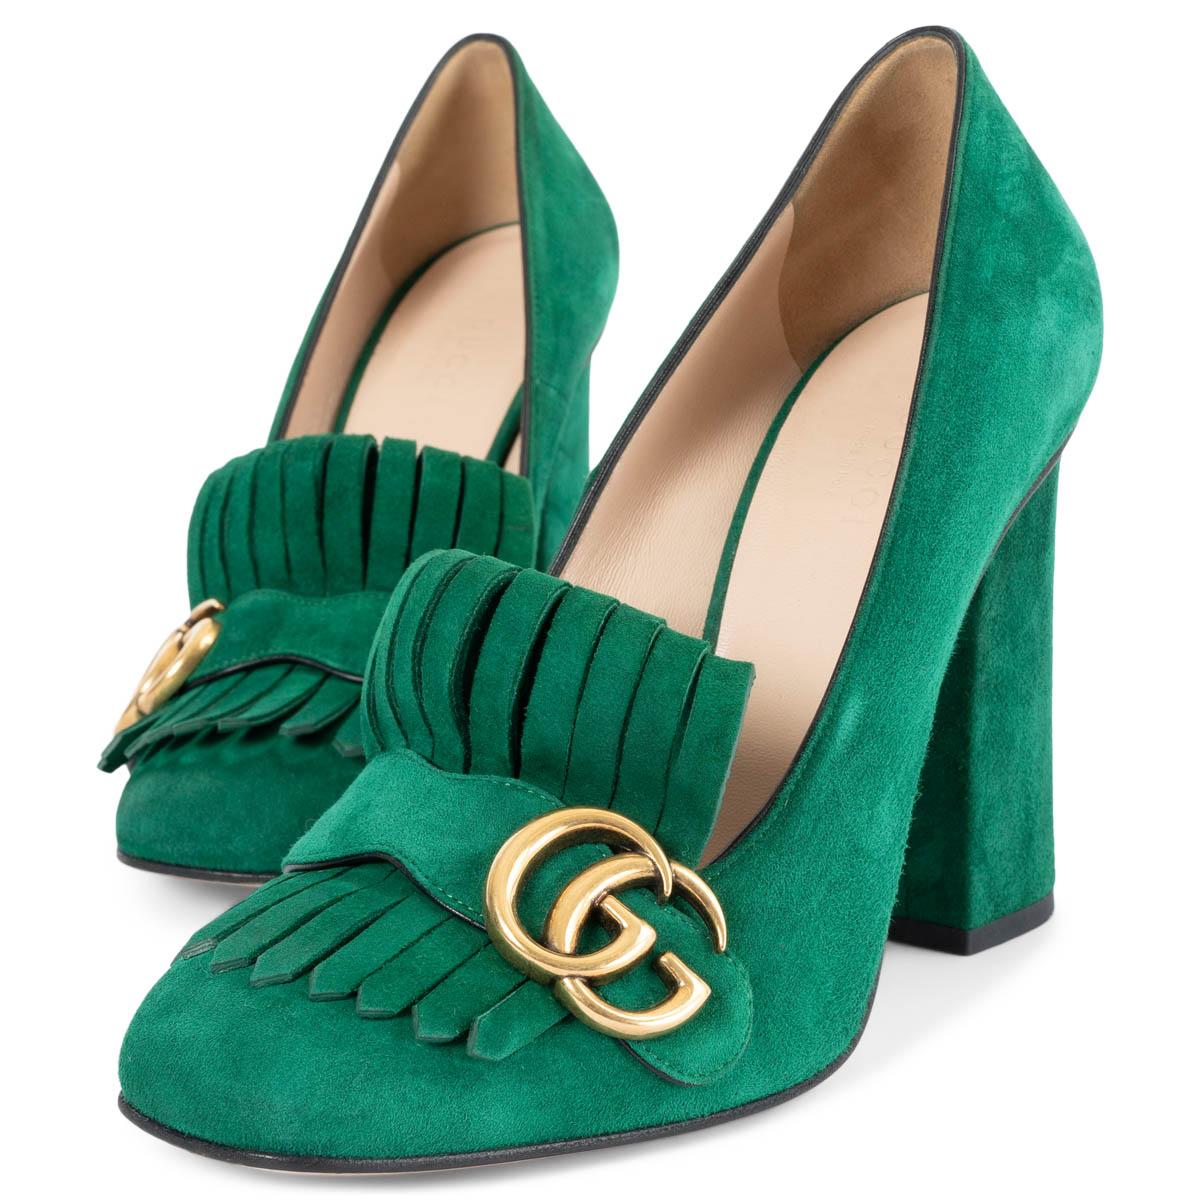 GUCCI emerald green suede GG MARMONT 105 FRINGE Pumps Shoes 38.5 1